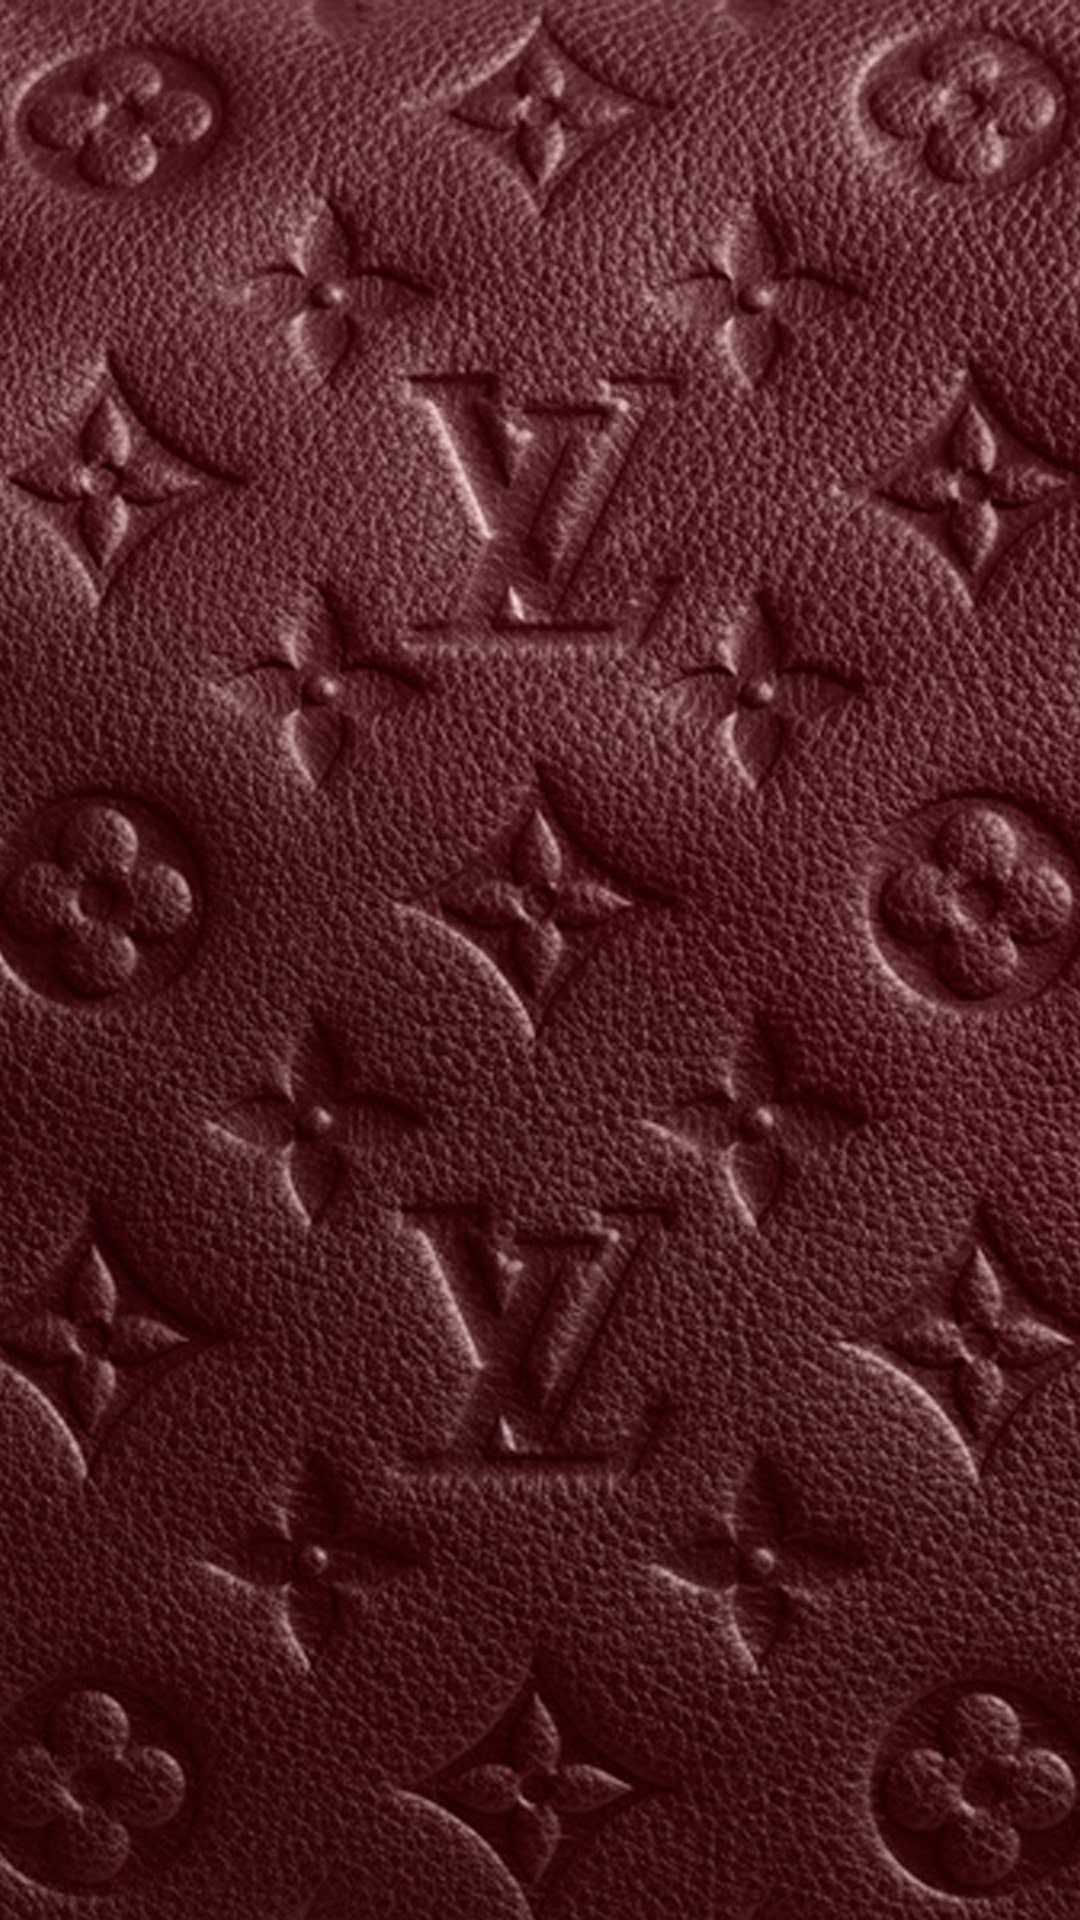 Louis Vuitton Wallpaper Discover more background, gold, high resolution,  iphone, Pink wallpaper.